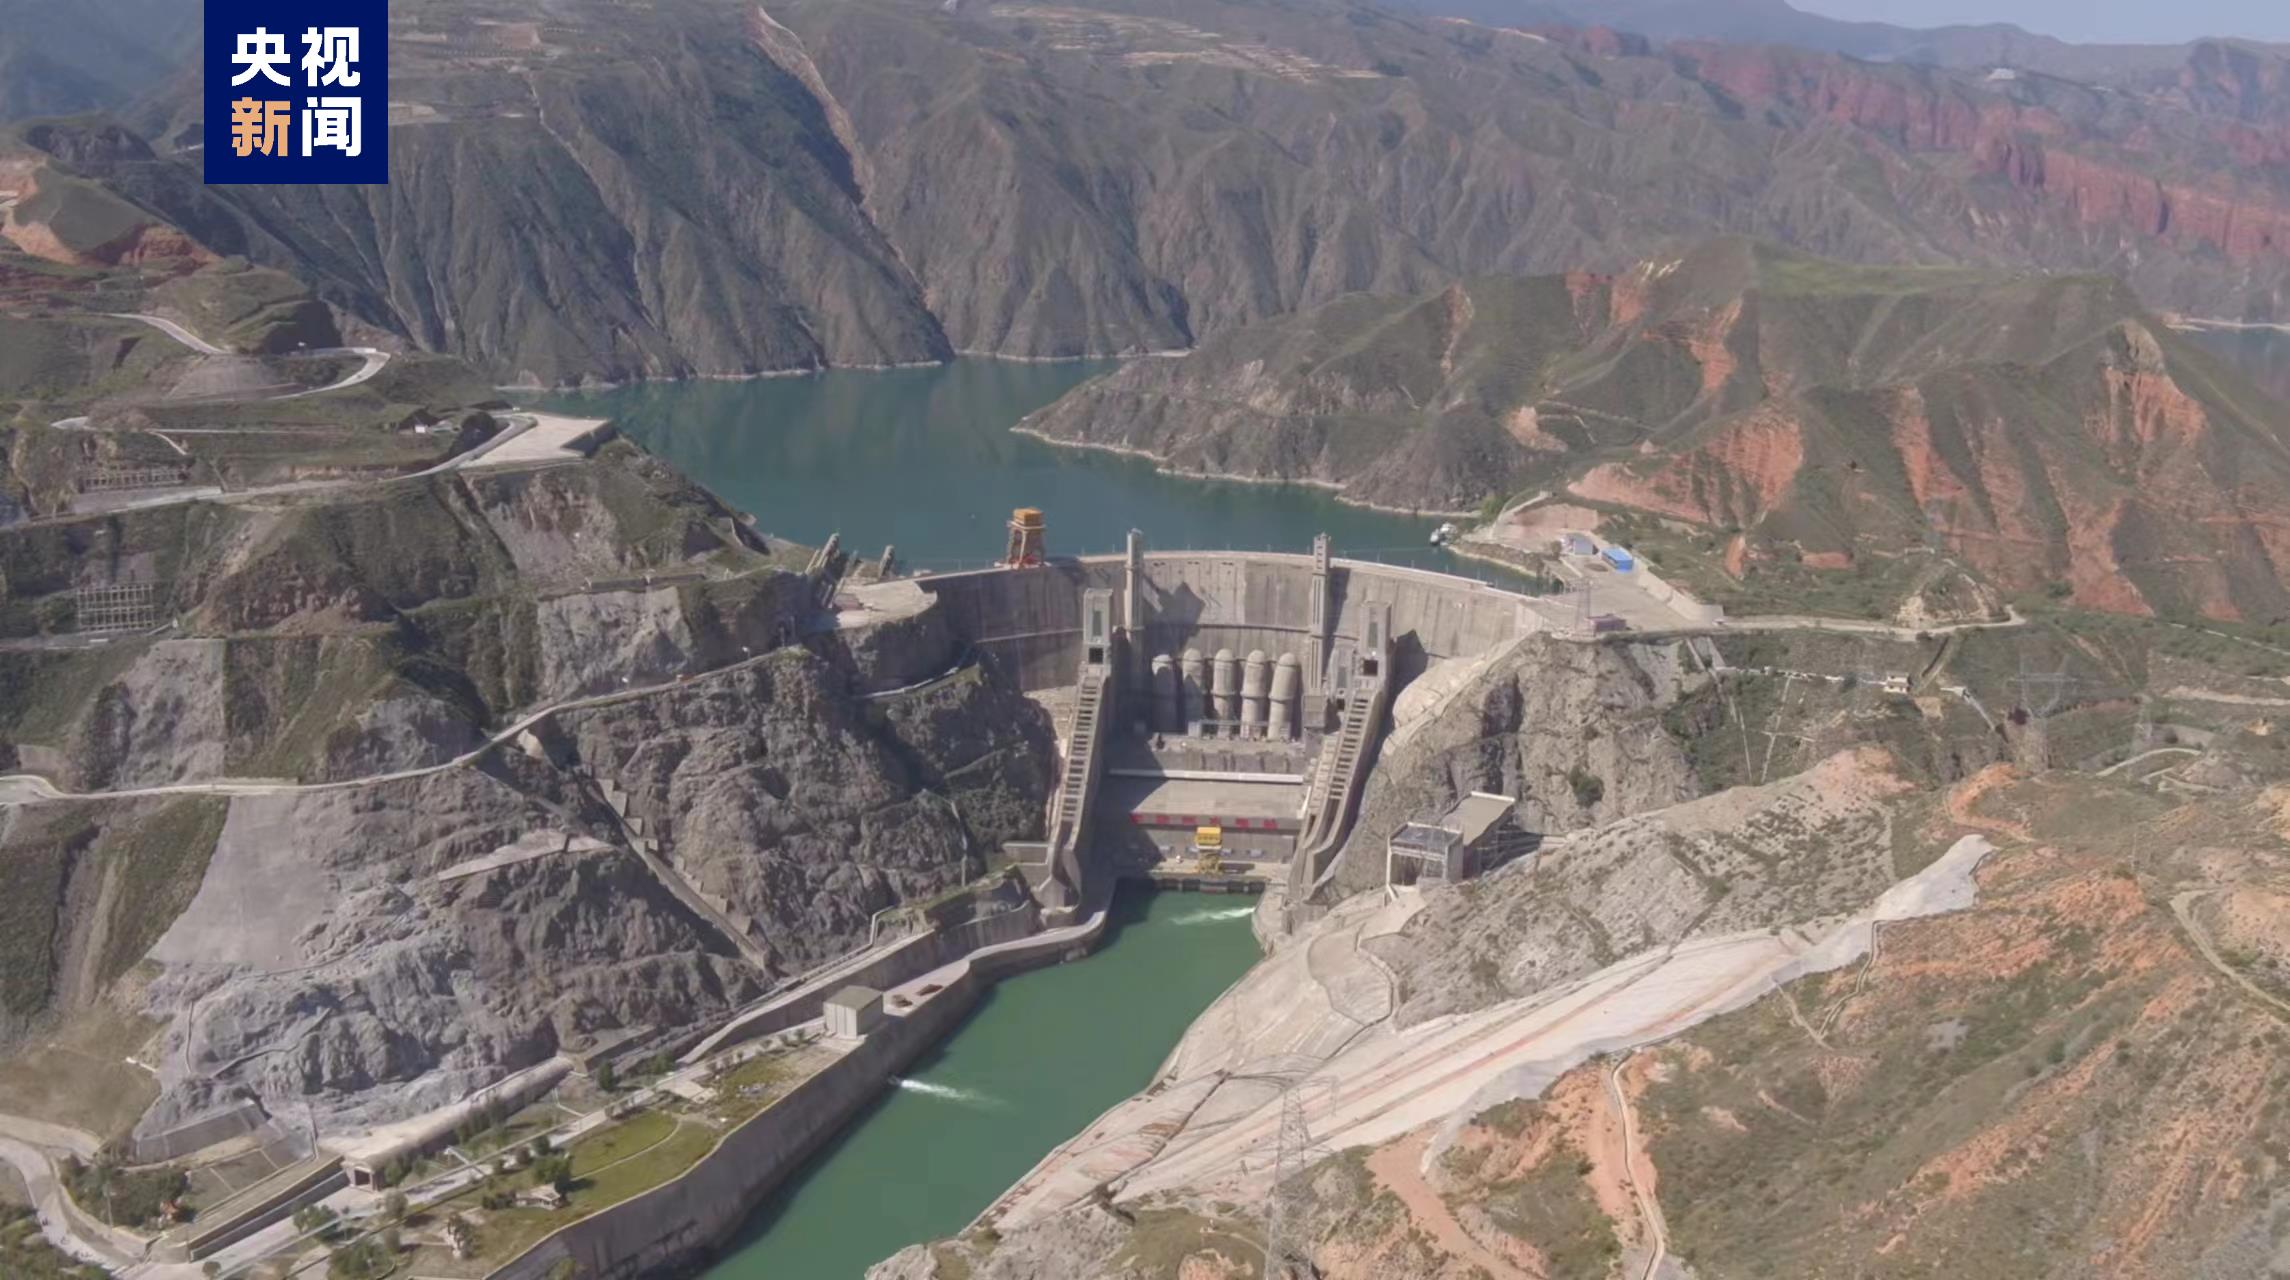 A view of  the Lijiaxia Hydropower Station at the border of Jainca County and Hualong County in northwest China's Qinghai Province. /CMG